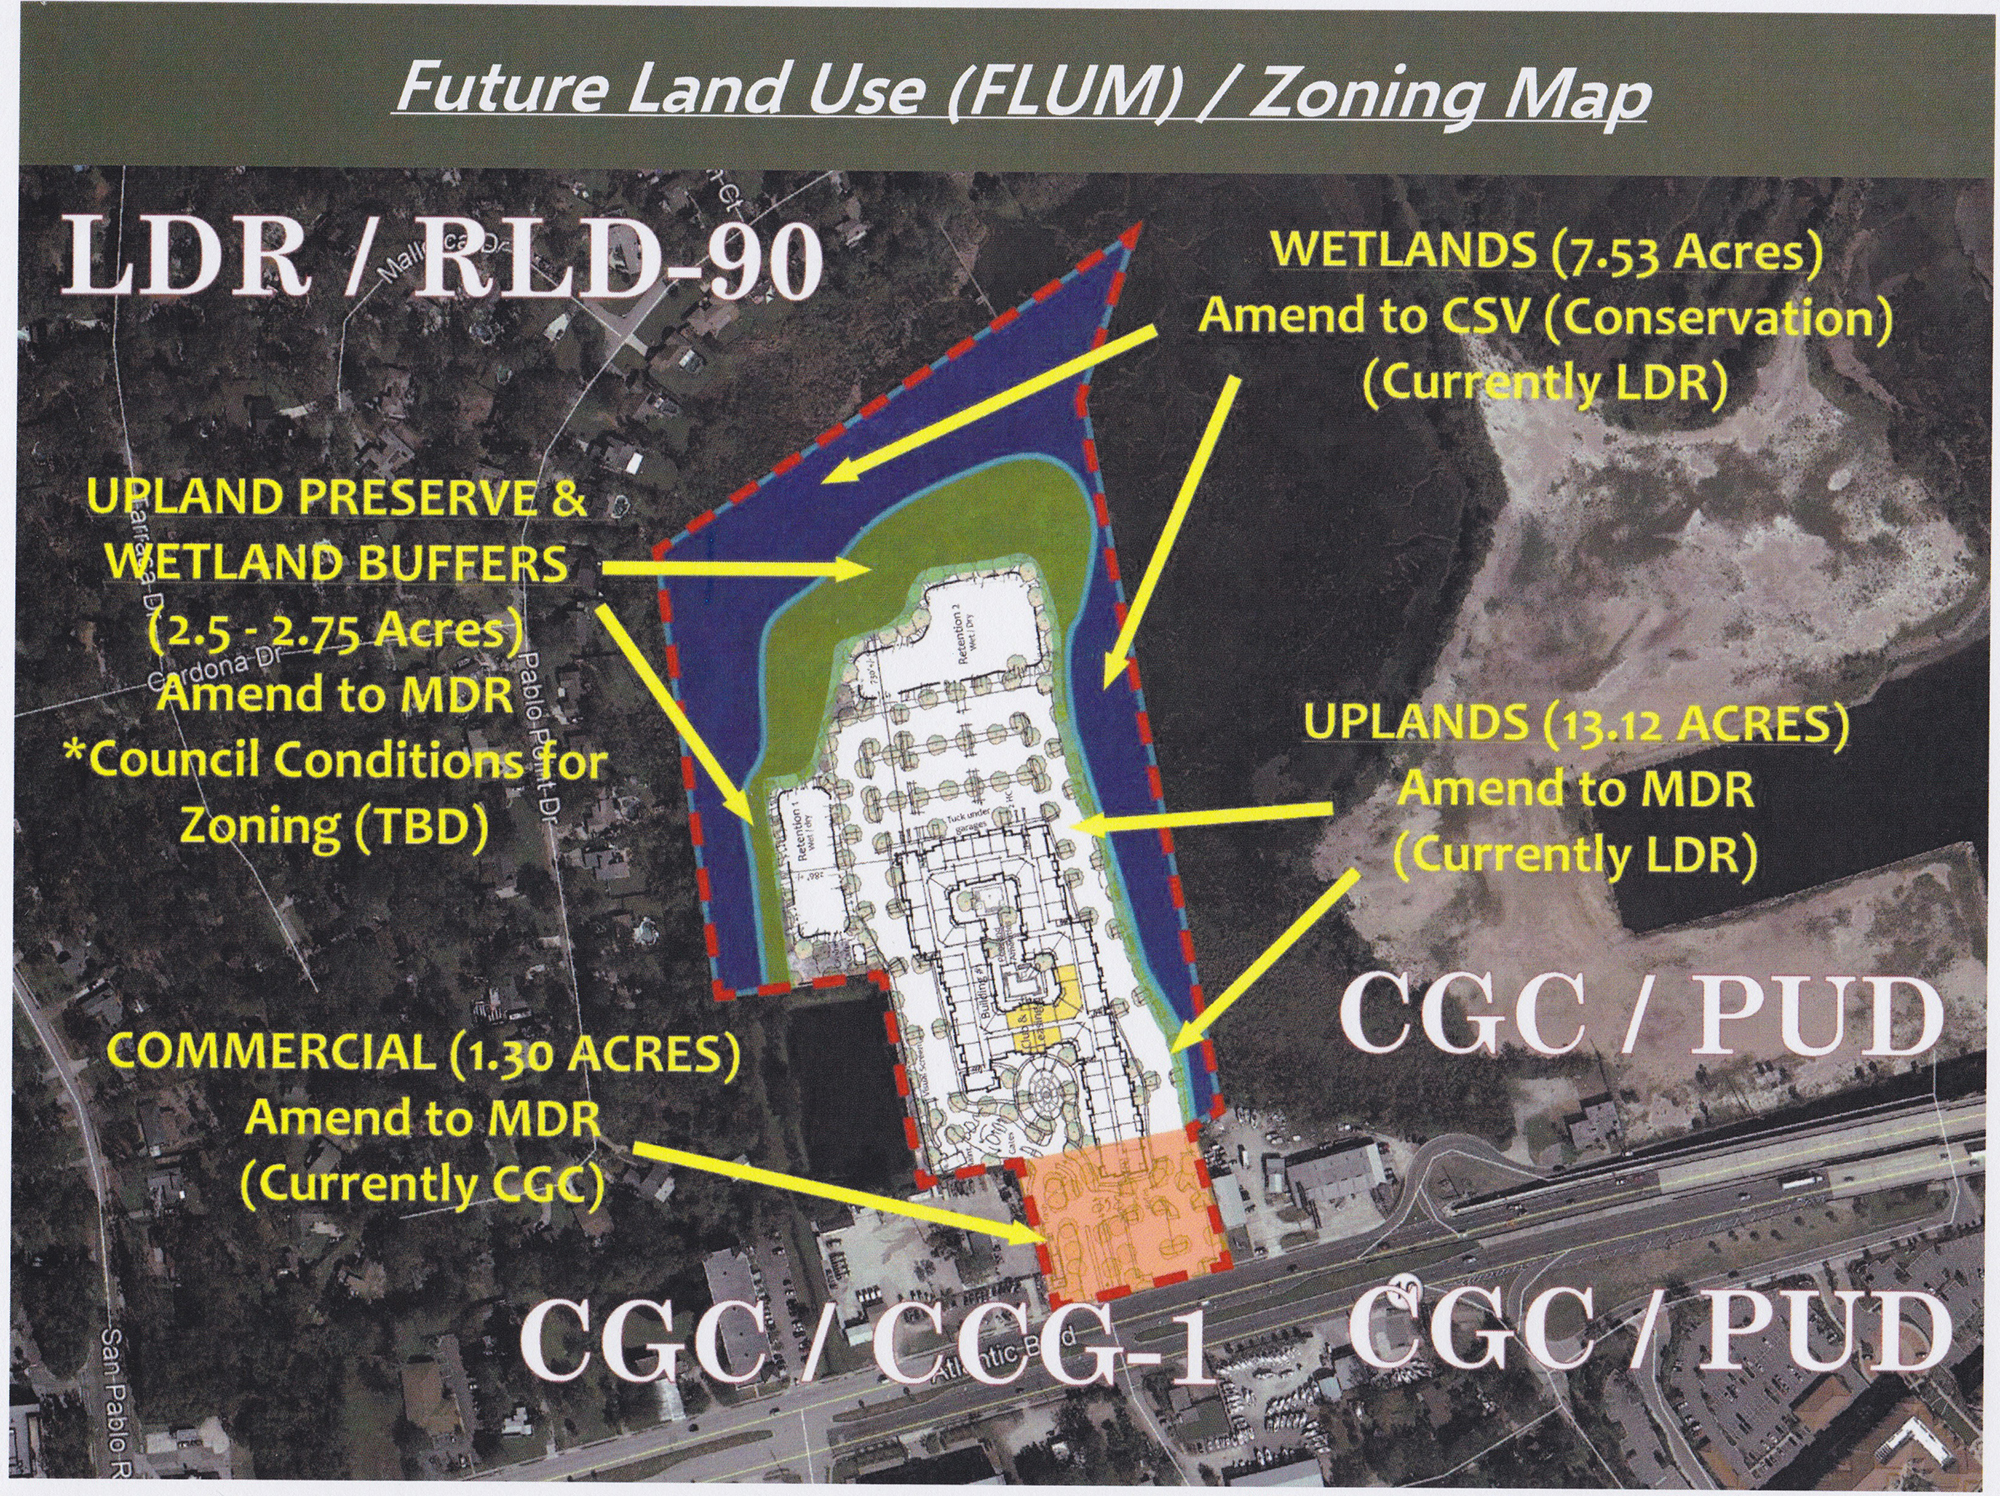 The future land use plan around the proposed development.